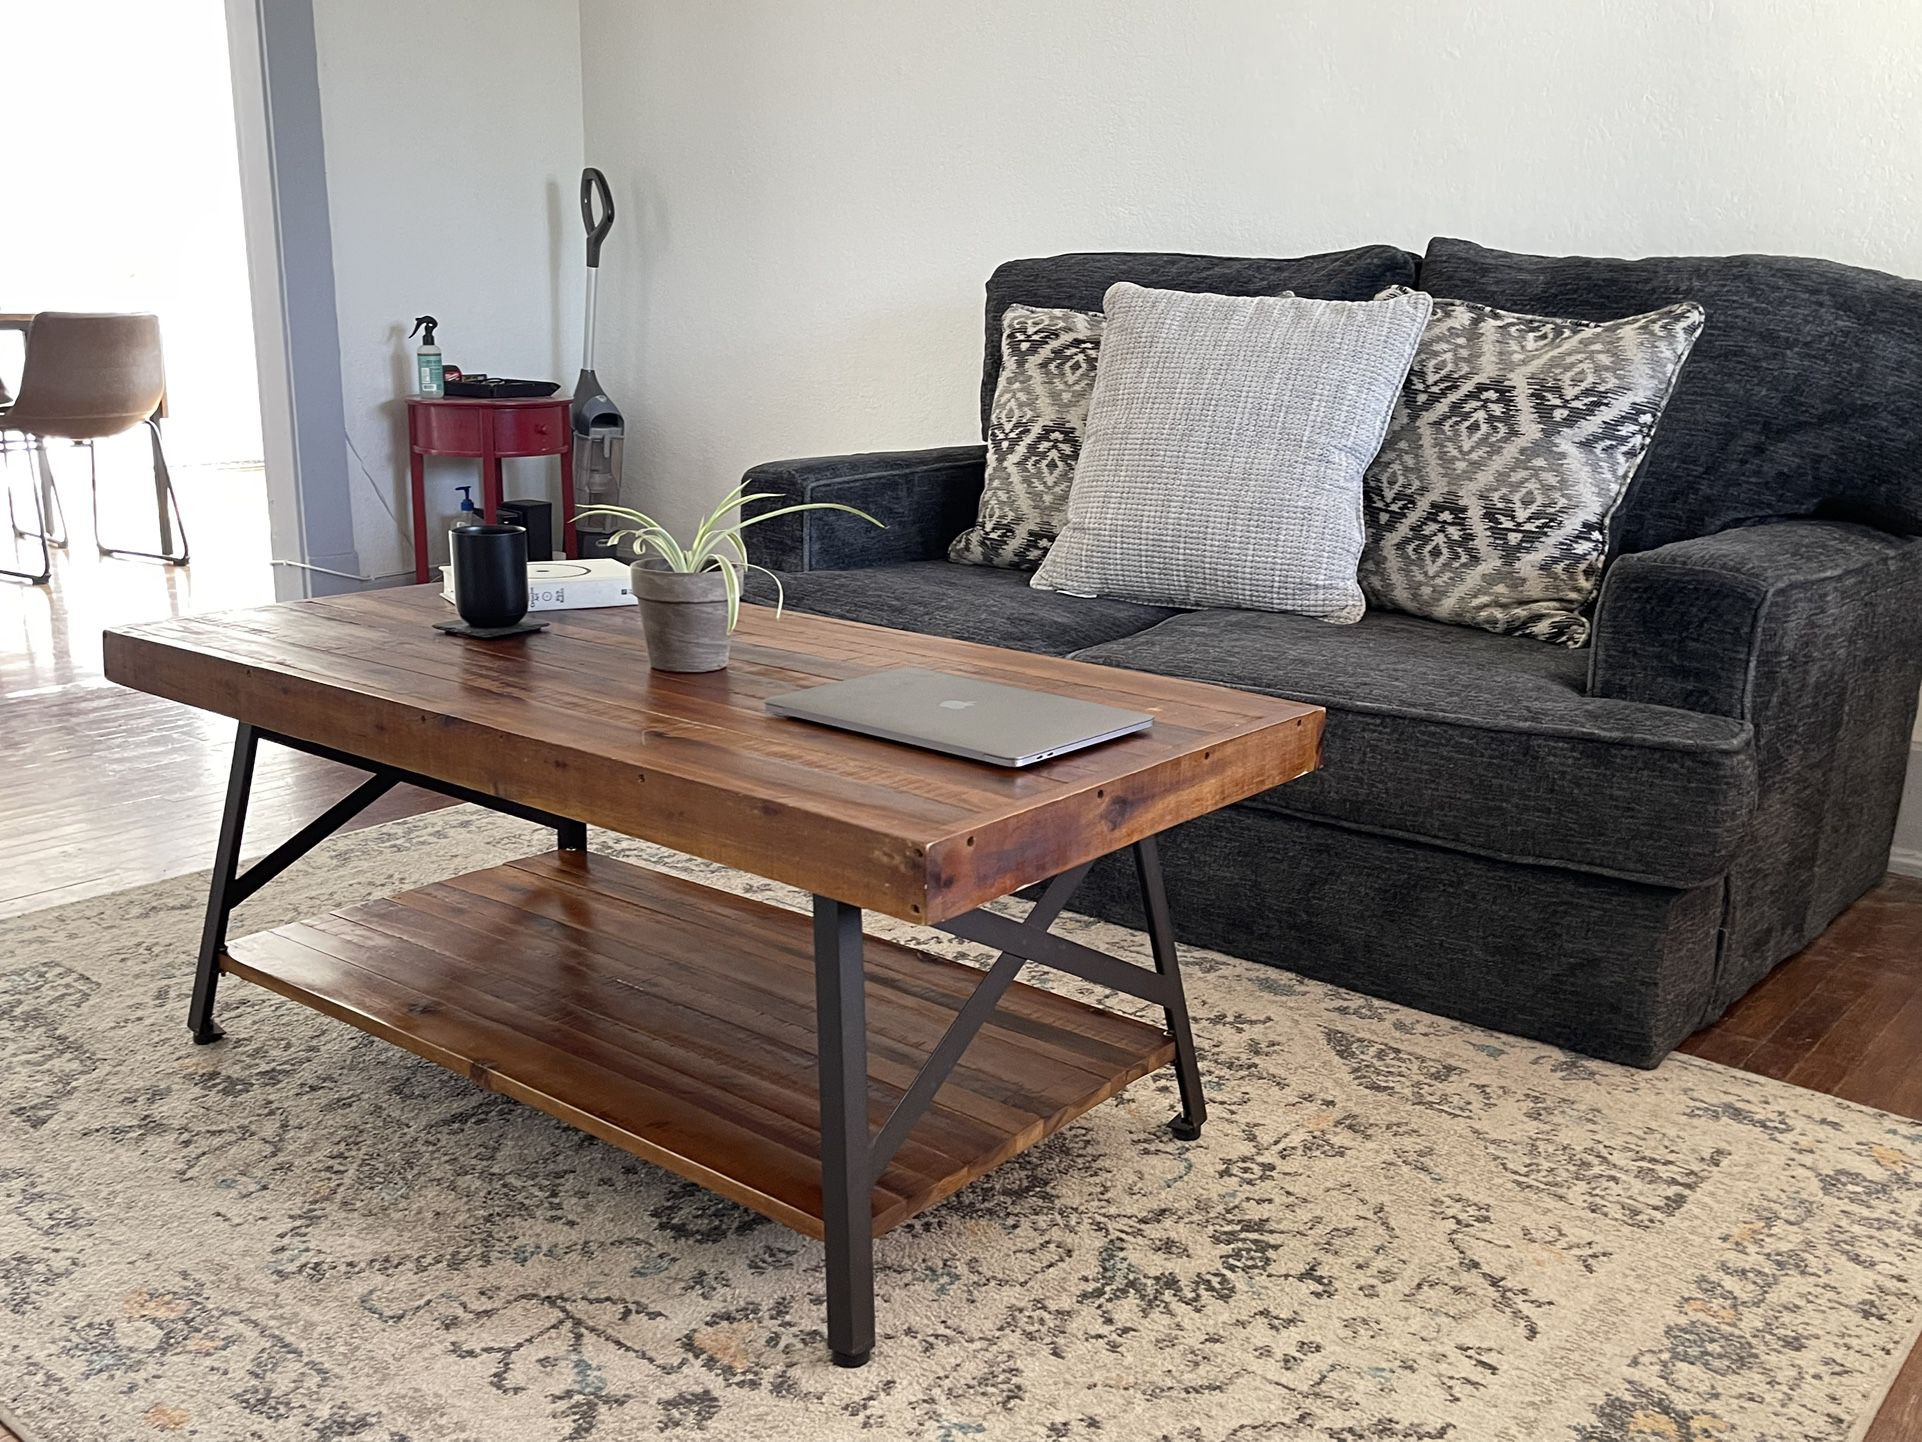 Living Room set (Couch, Coffee Table, Rug)